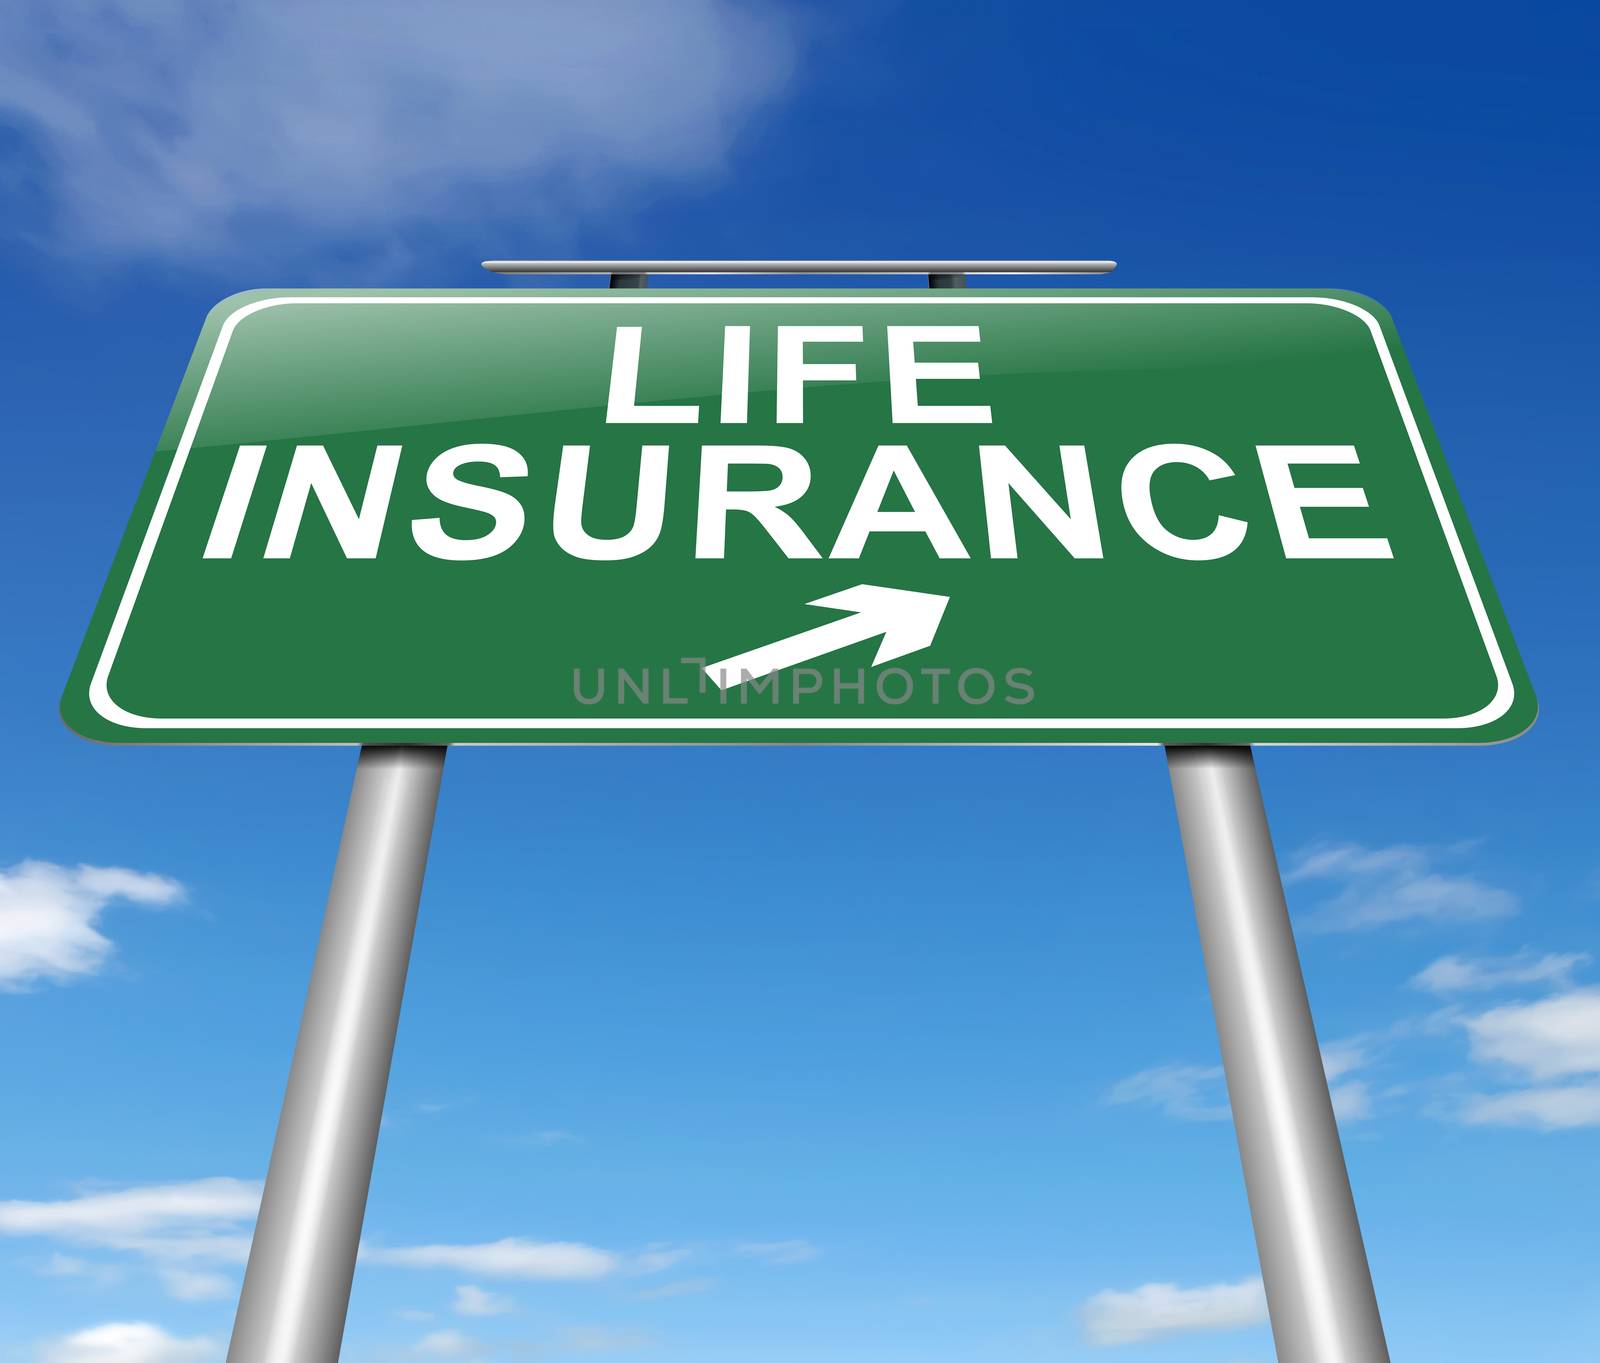 Illustration depicting a sign with a Life insurance concept.